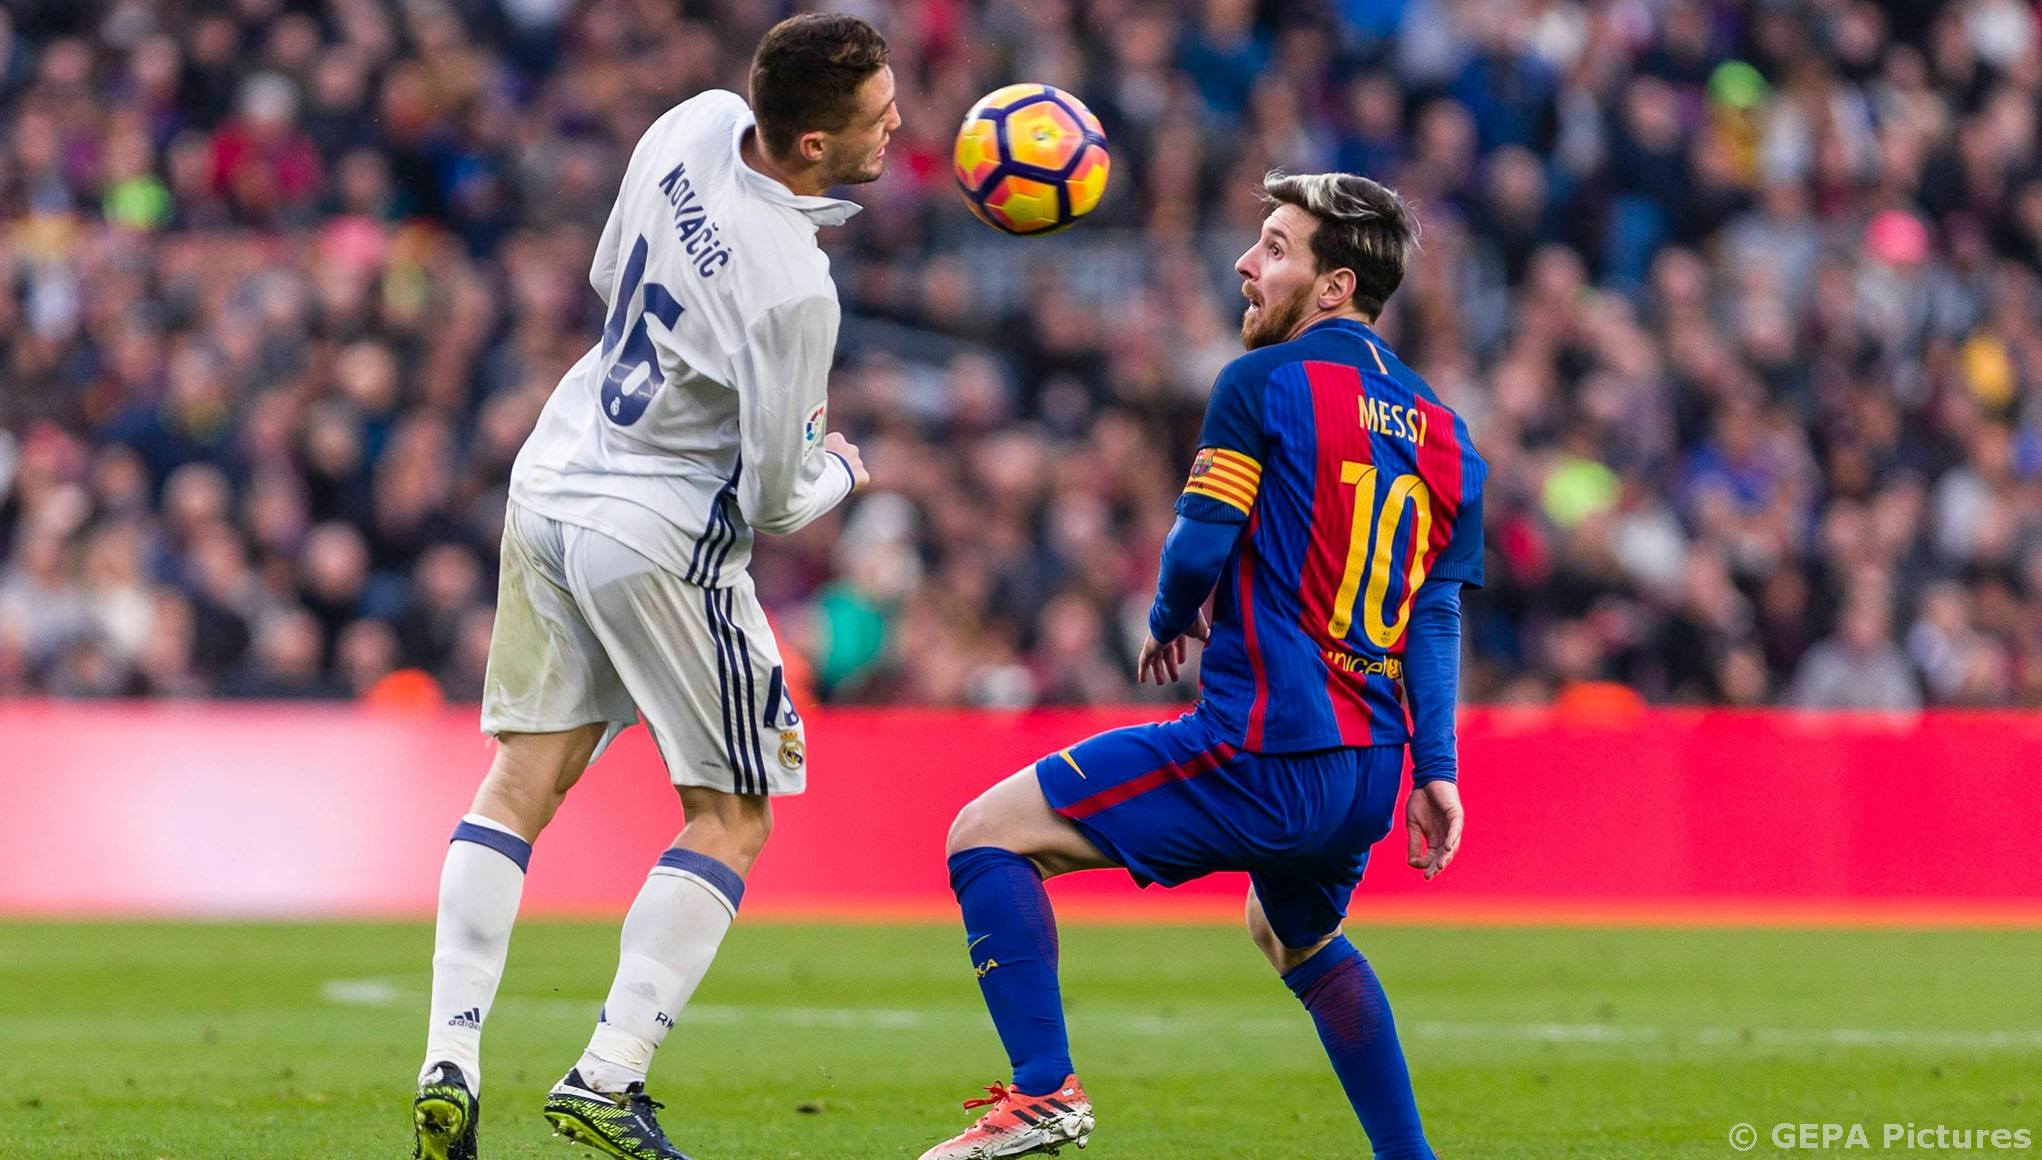 Covacic-and-Messi